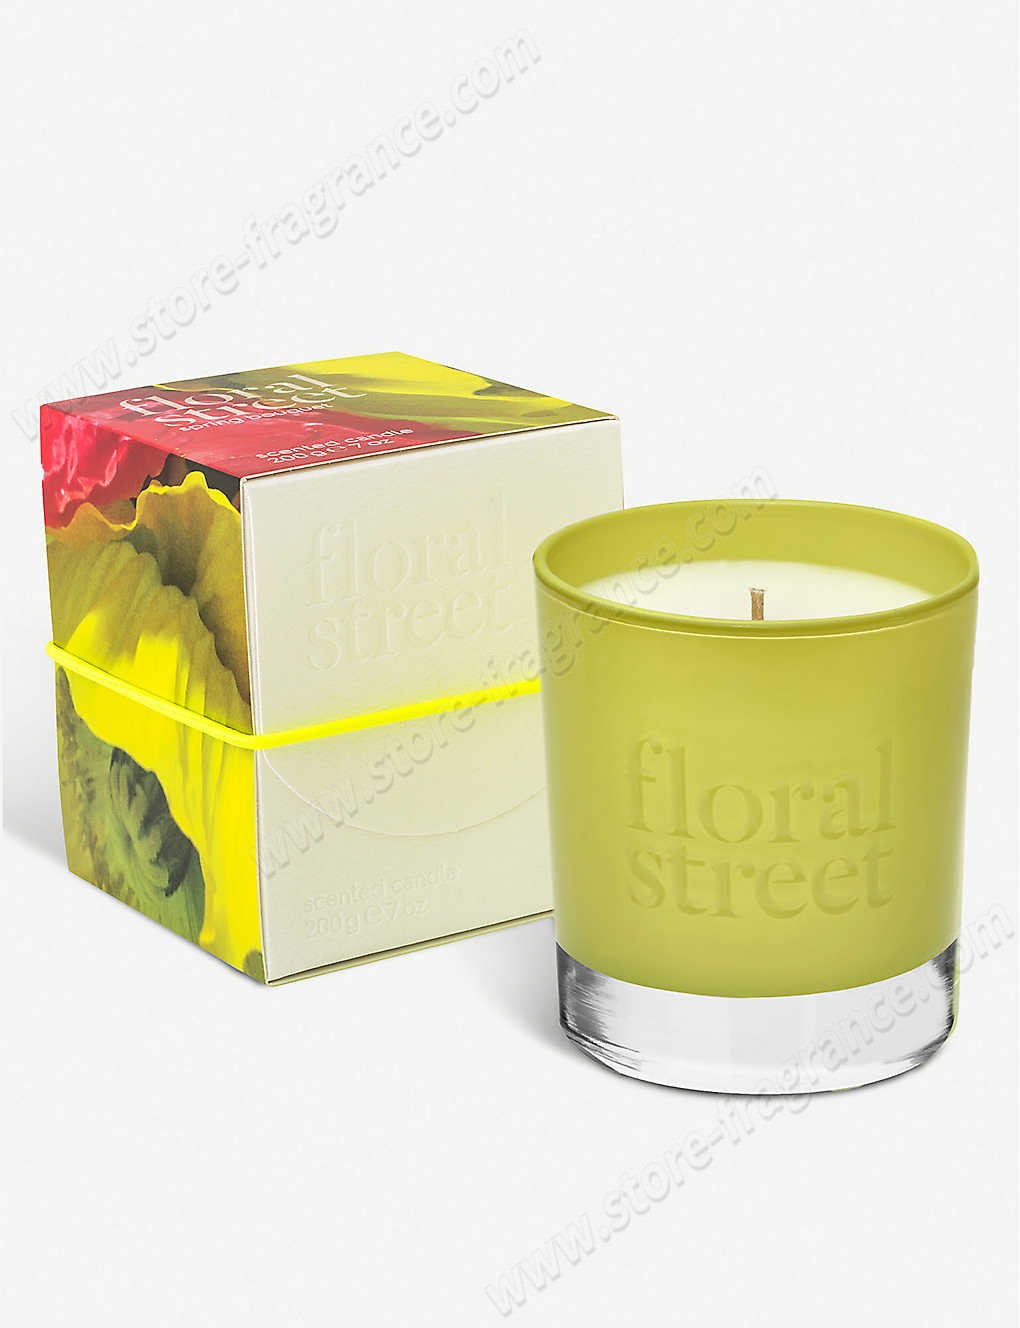 FLORAL STREET/Spring Bouquet scented candle 200g ✿ Discount Store - -1